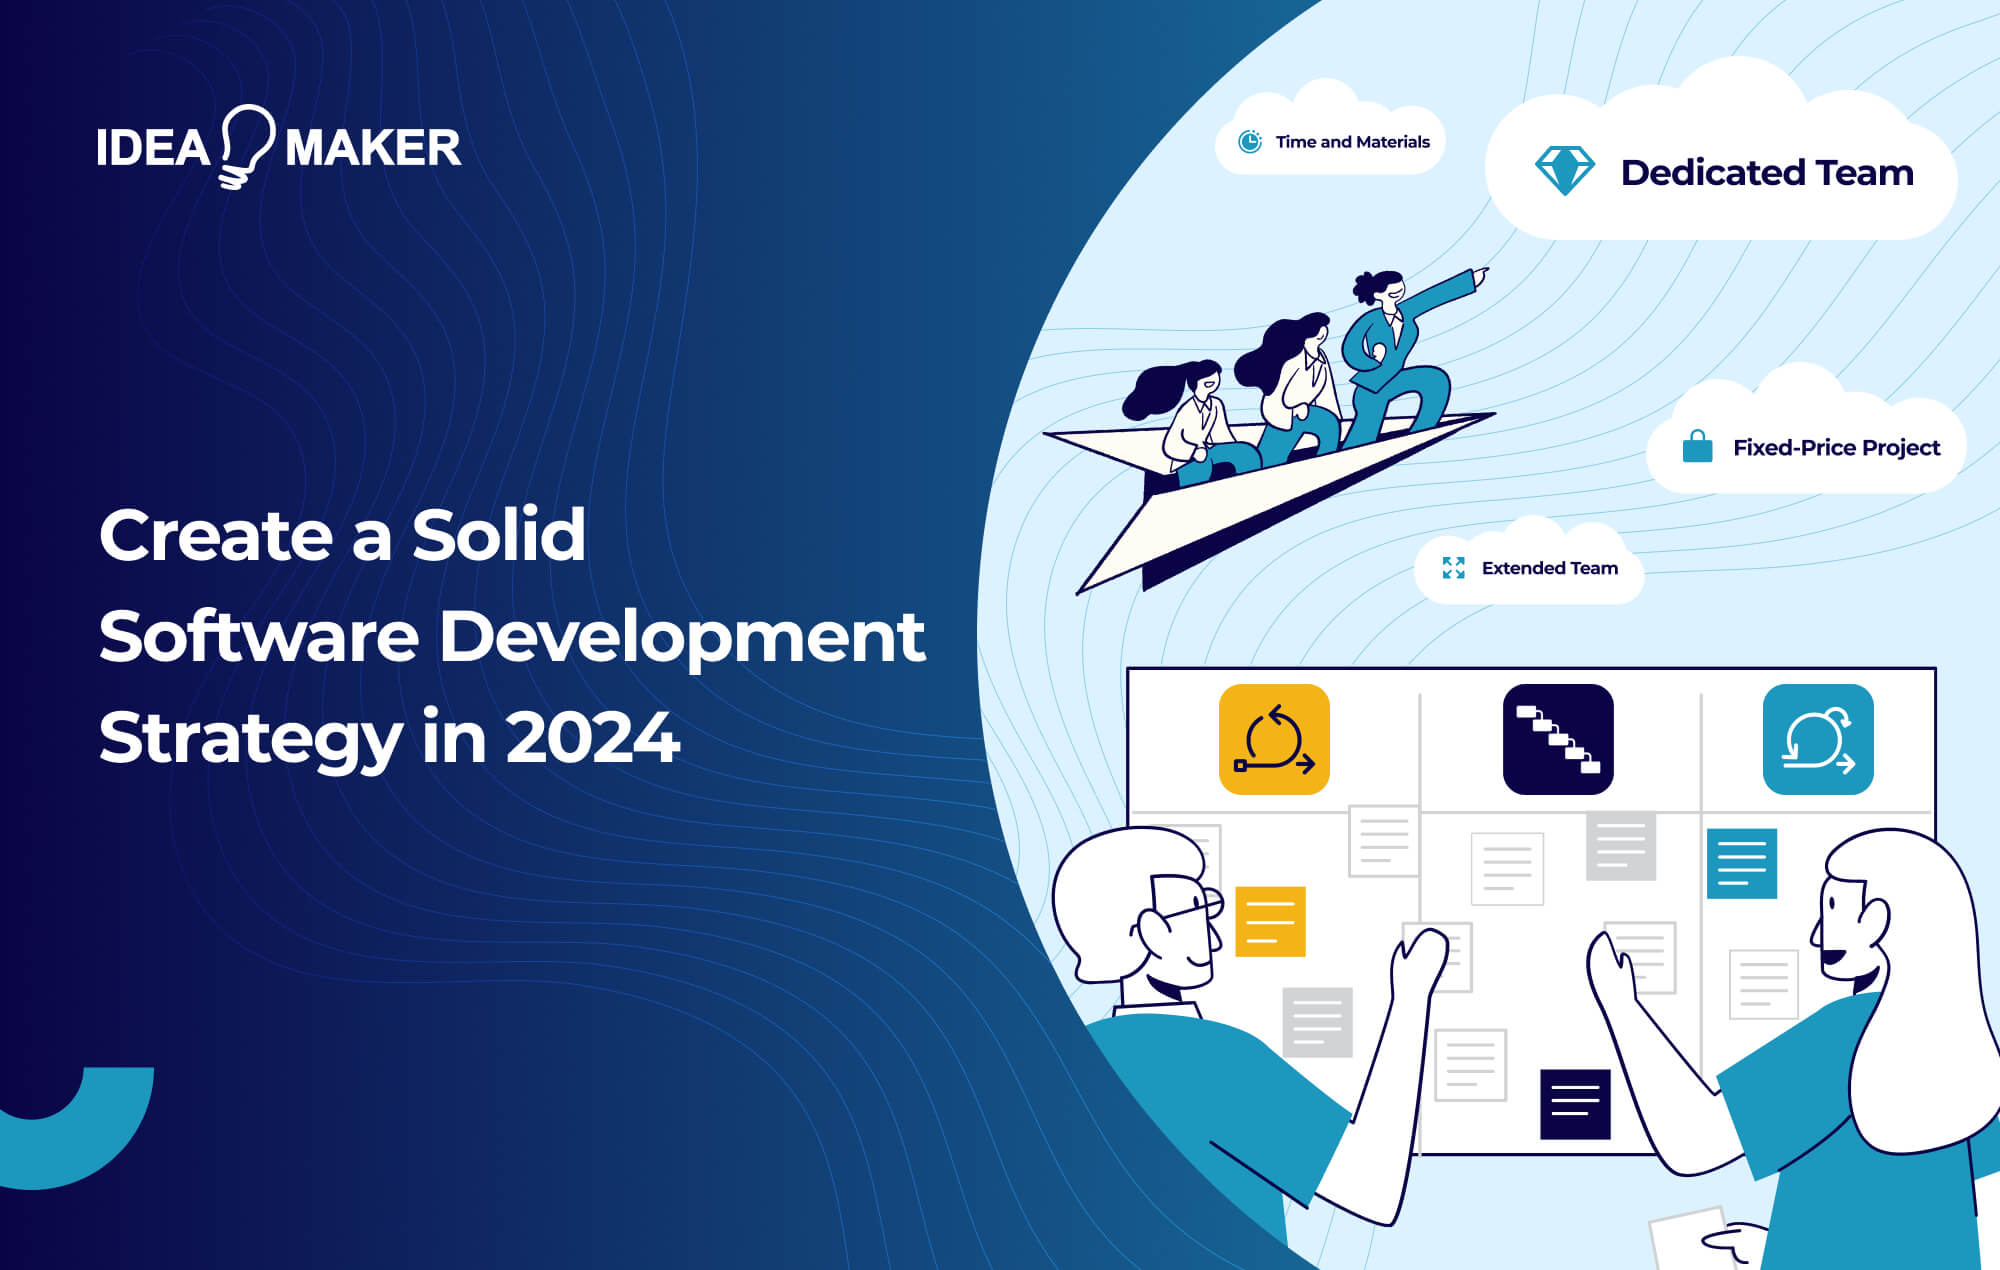 Create a Solid Software Development Strategy in 2024